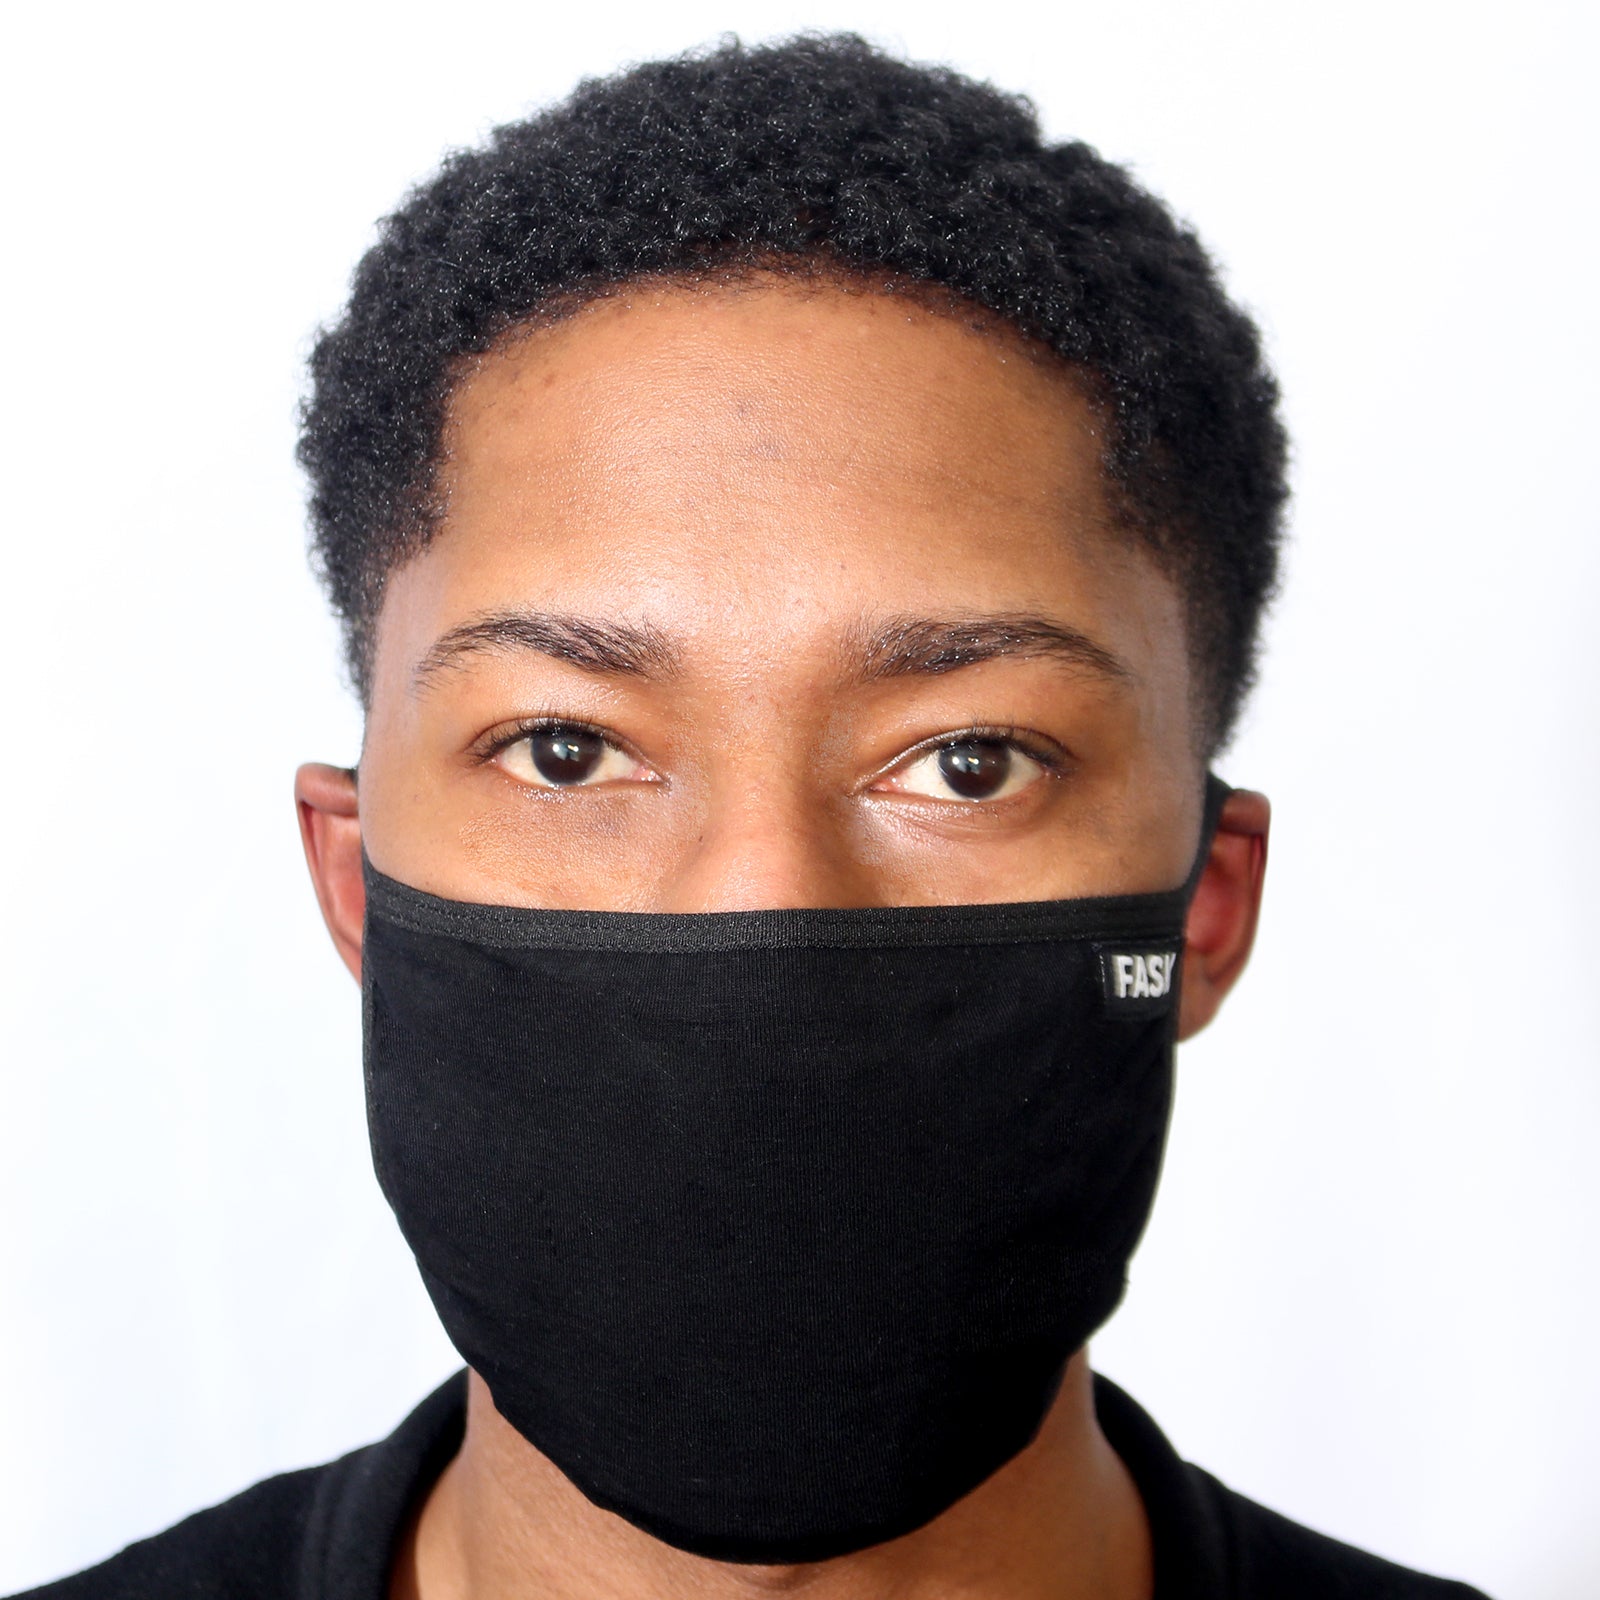 FASK Clean Cotton 2.0 Mask with Interchangeable Filter and Adjustable Size Strap